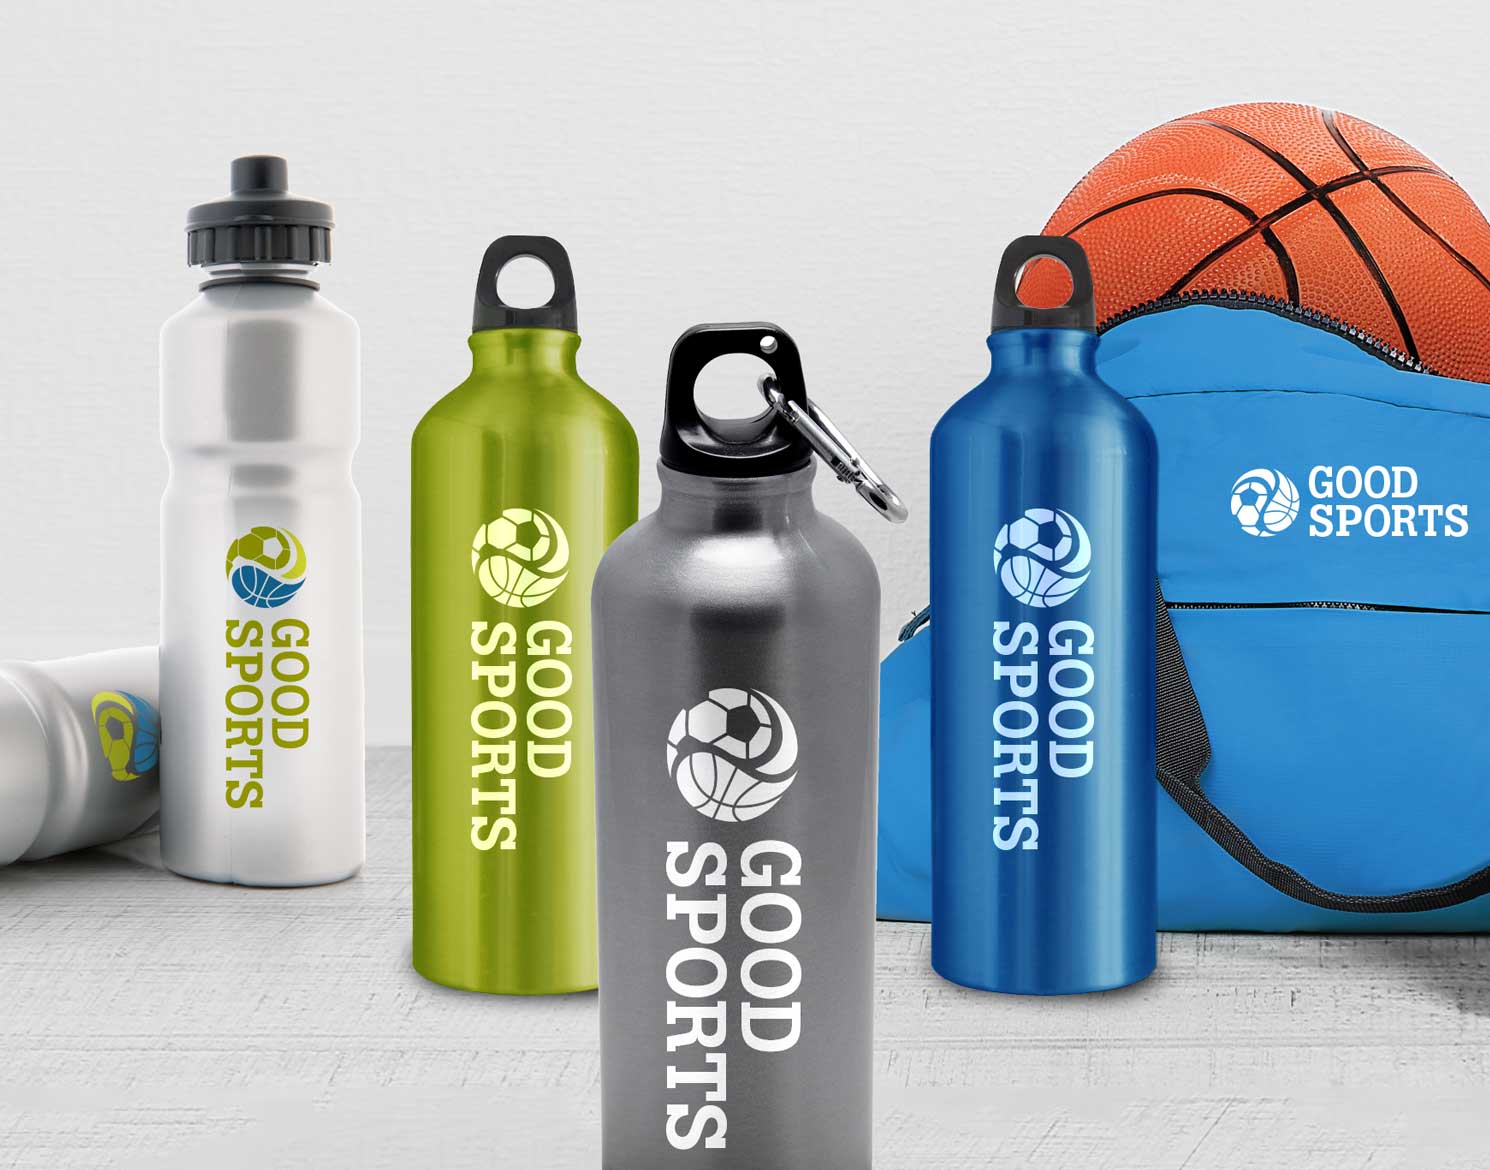 Good Sports logo applied to sports bottles and bag